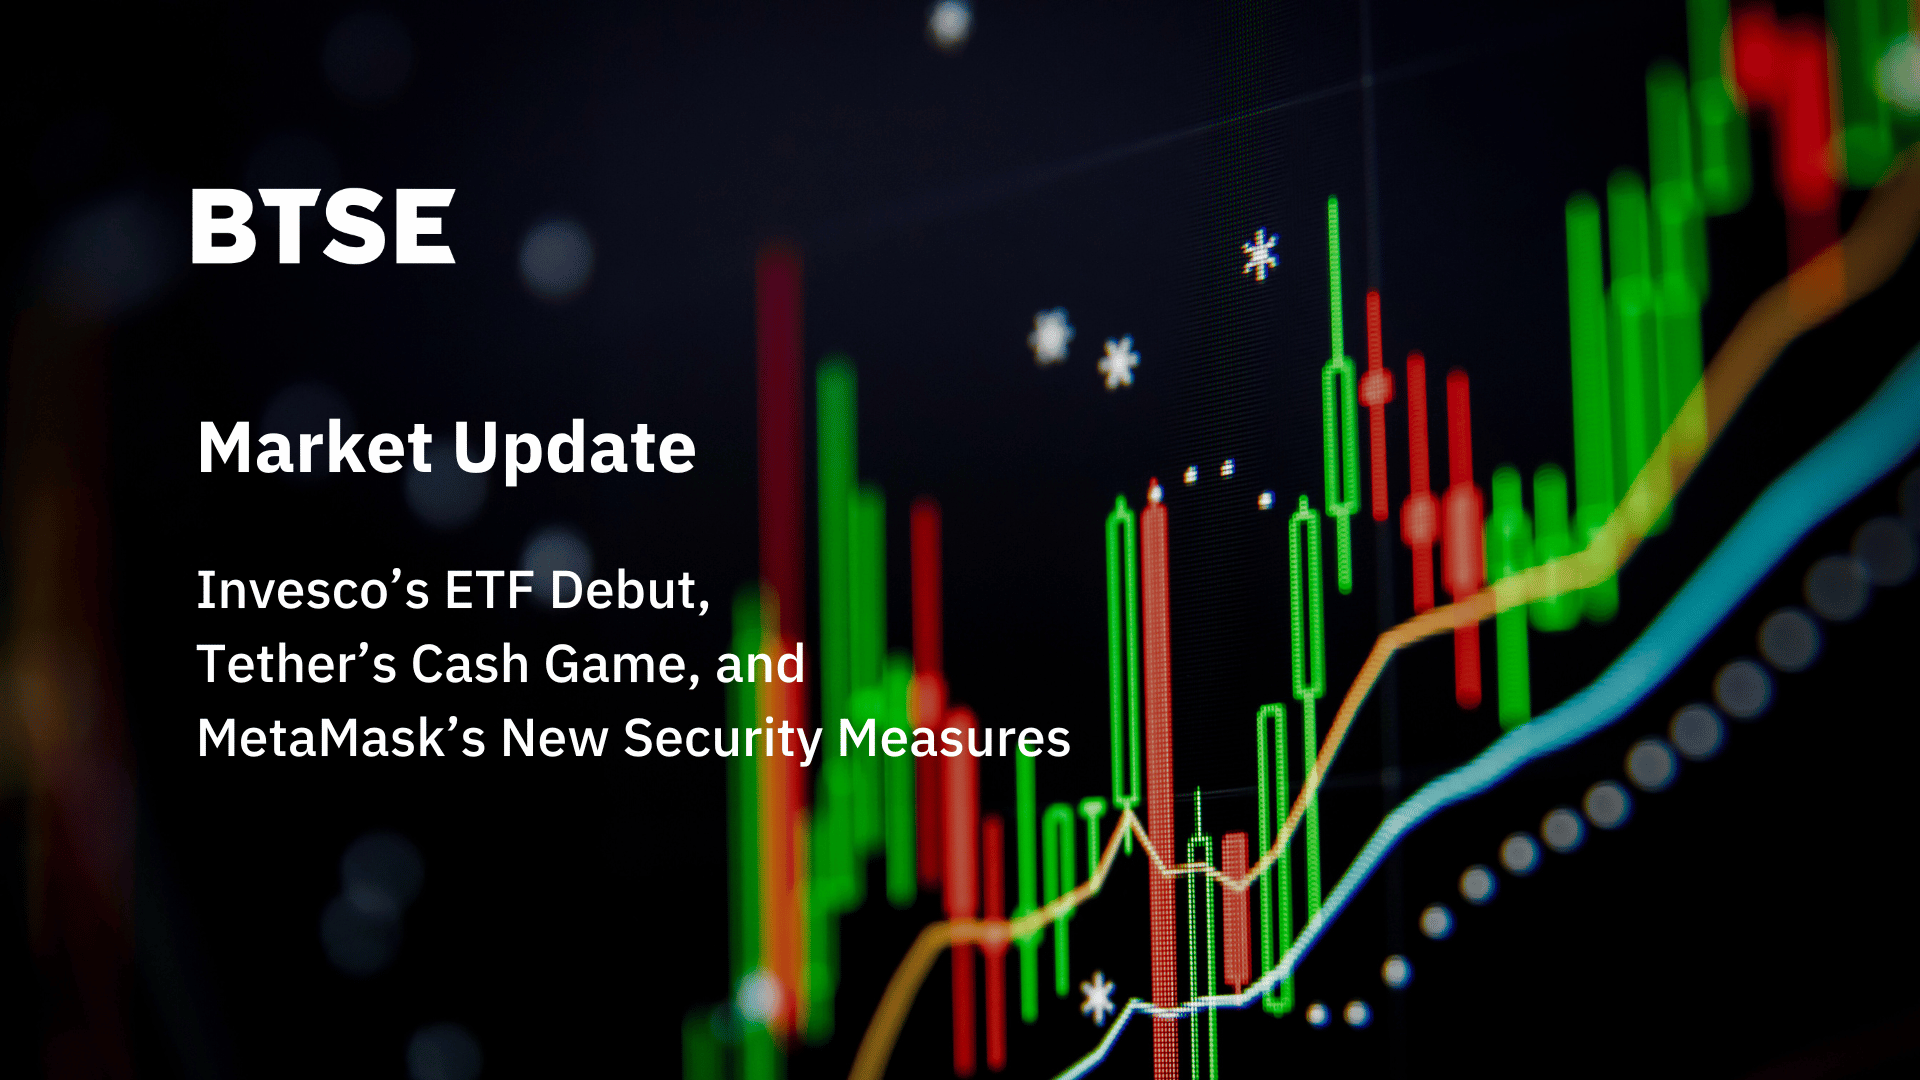 Invesco’s ETF Debut, Tether’s Cash Game, and MetaMask’s New Security Measures